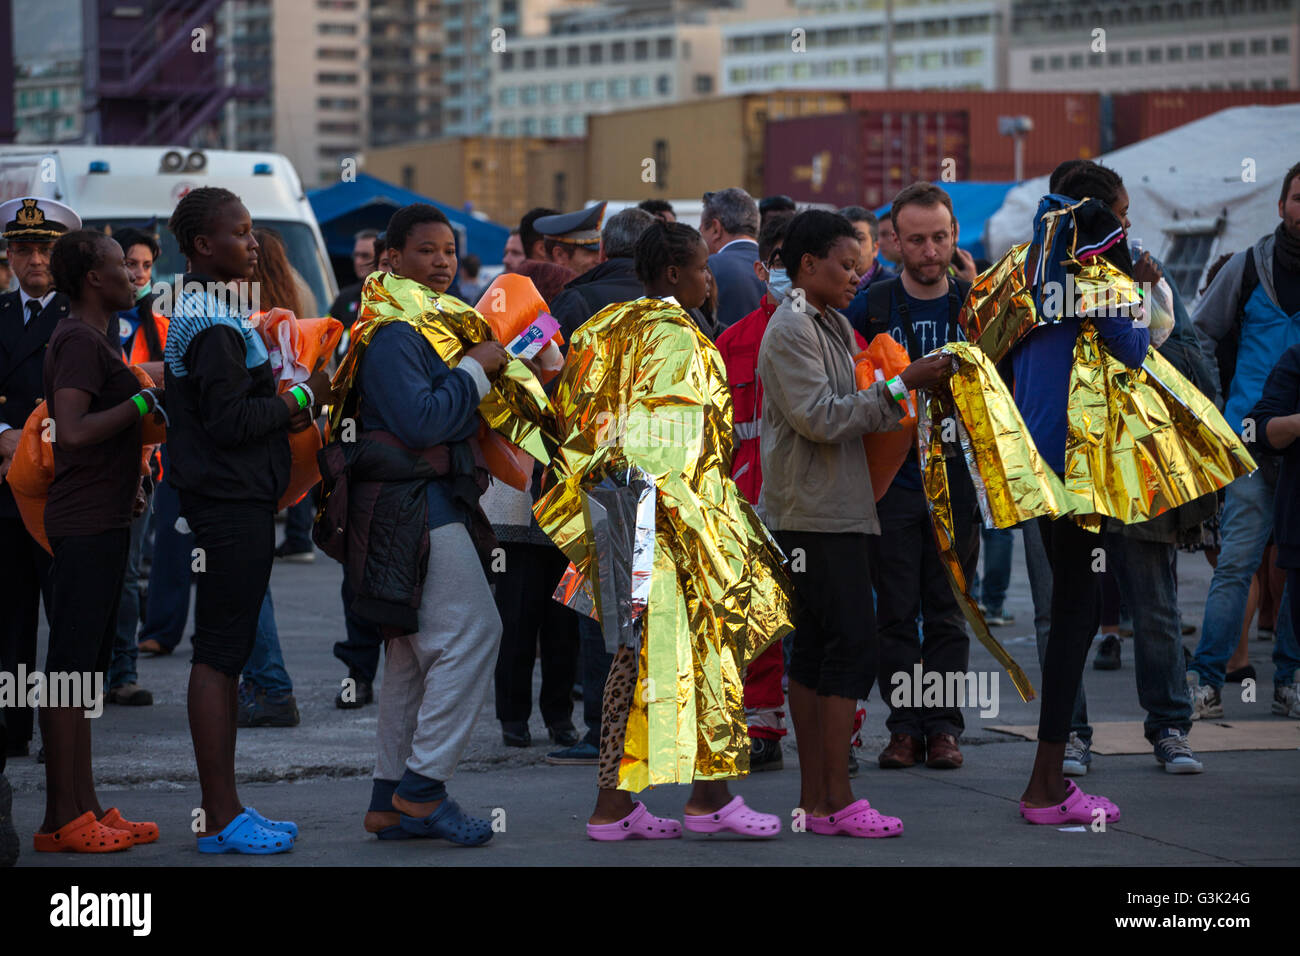 Palermo, Italy. 13th Apr, 2016. Approximately 890 migrants have arrived at the port of Palermo, on the military Norwegian ship Siem Pilot. The vessel has been a major transporter of migrants fleeing the Middle East and Africa to Europe. © Antonio Melita/Pacific Press/Alamy Live News Stock Photo